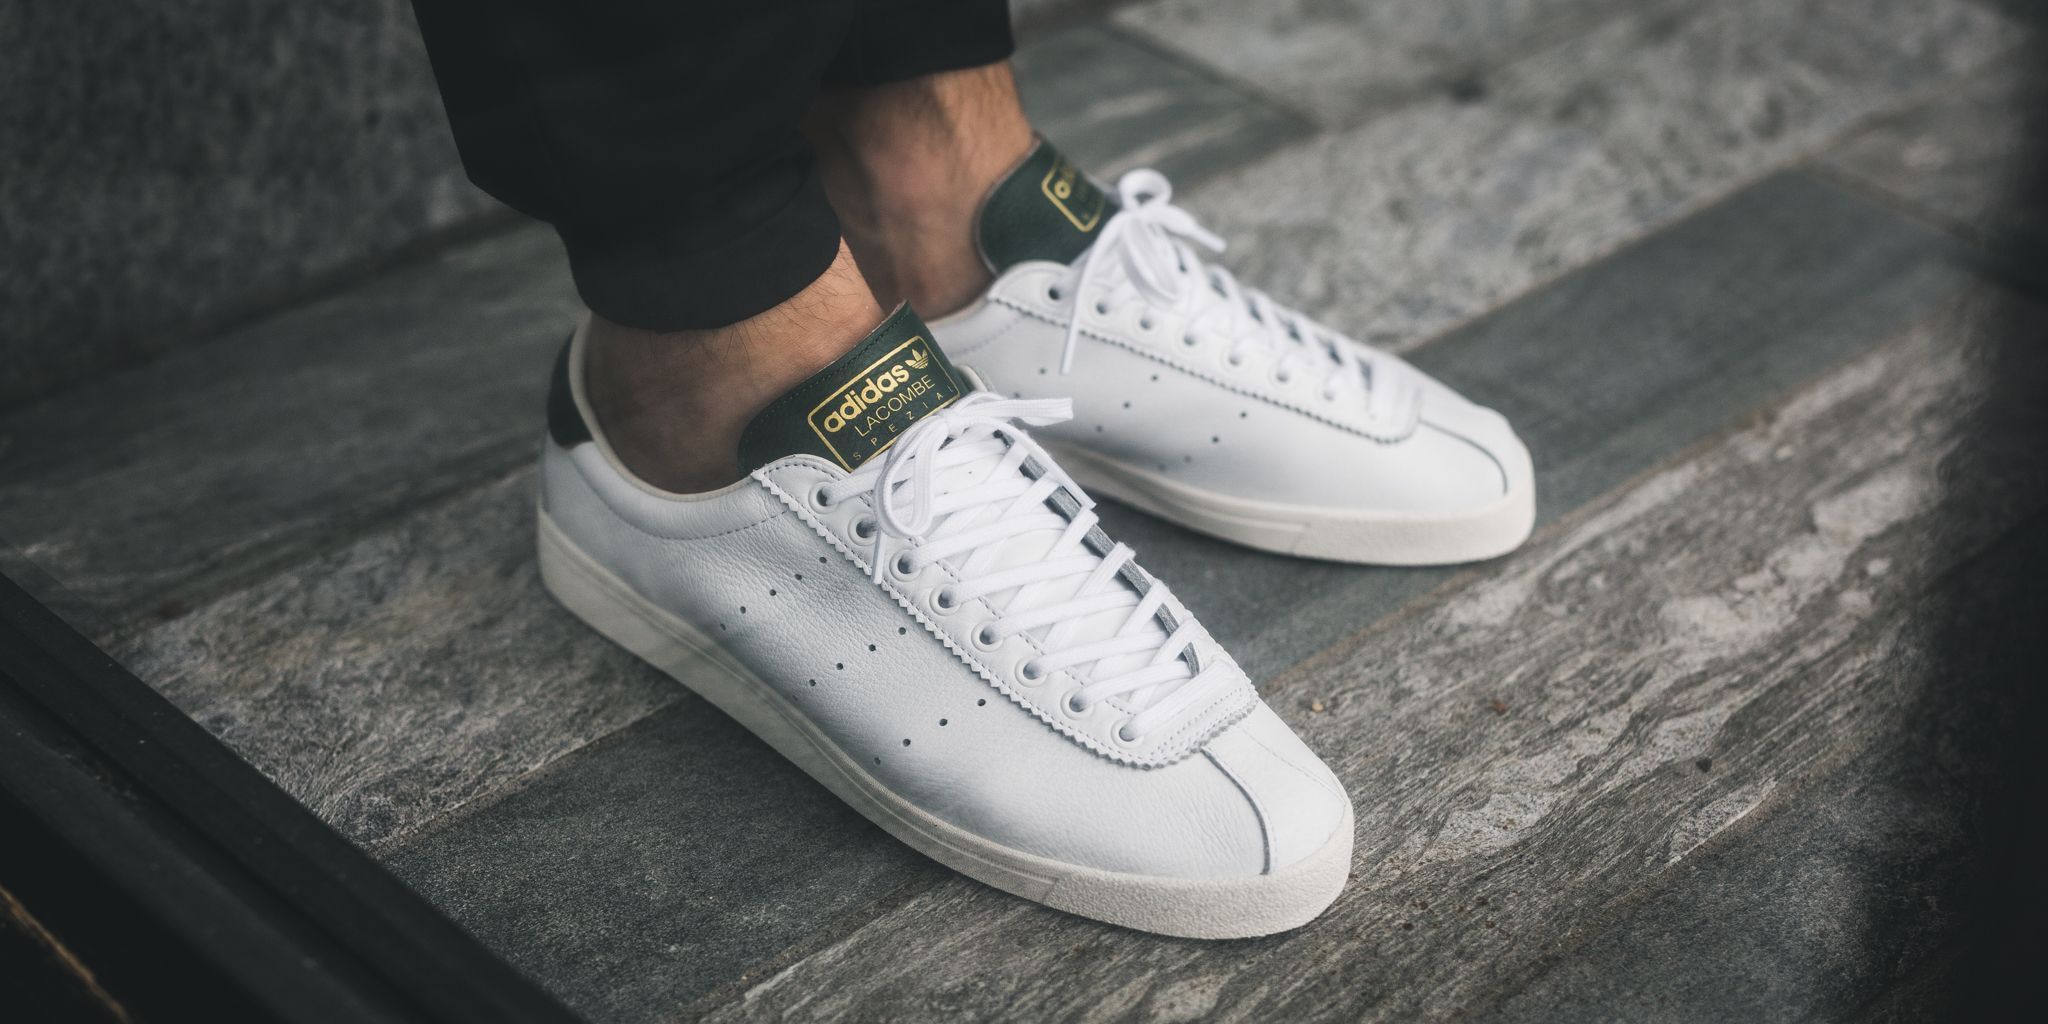 frecuencia inicial Superposición Titolo on Twitter: "ONLINE NOW 🎾 Adidas Lacombe #Spezial "White" SHOP HERE  ➡️ https://t.co/lC6pgZBmc4 #adidasSPEZIAL #adidas #lacombe  https://t.co/QYwOTQsqm3" / Twitter